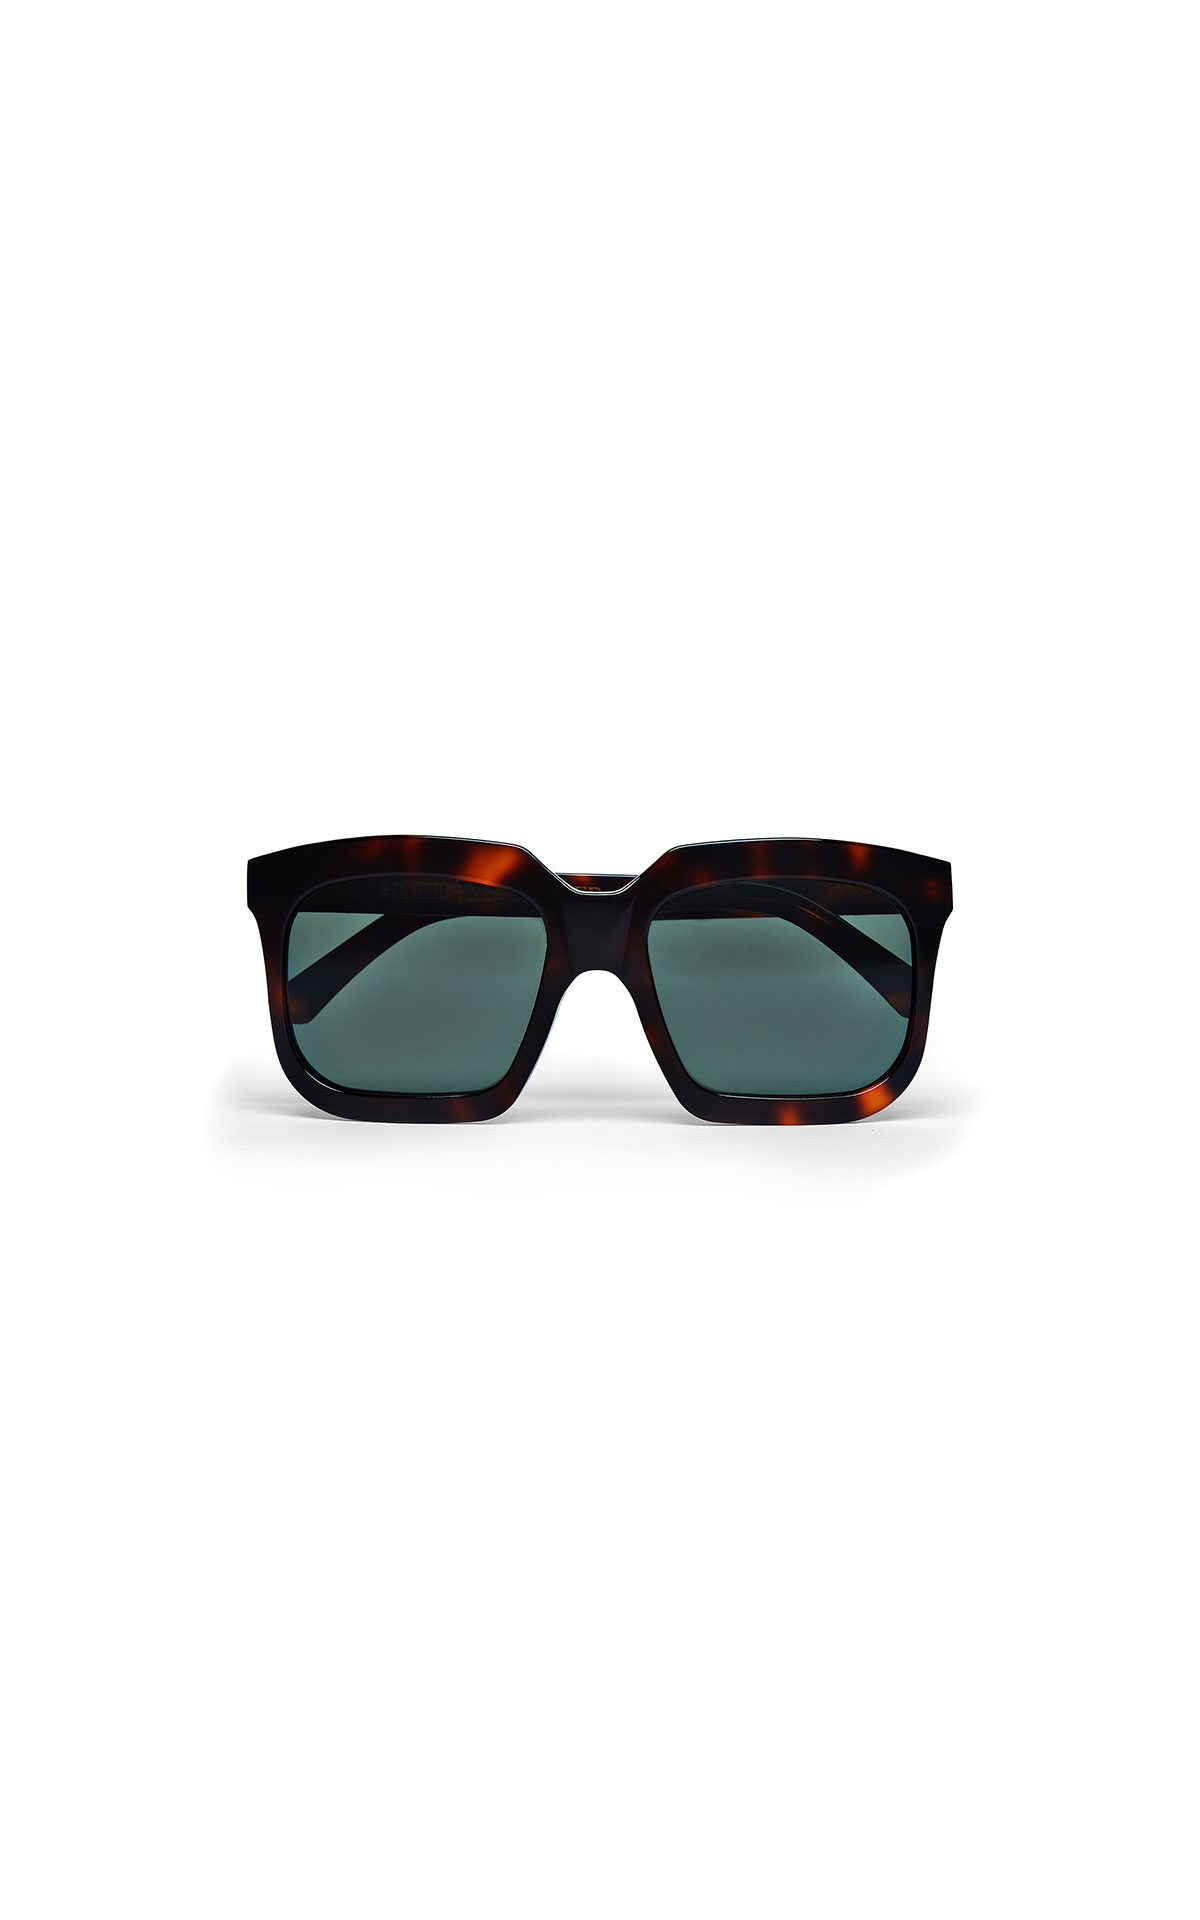 Holland Cooper City sunglasses from Bicester Village